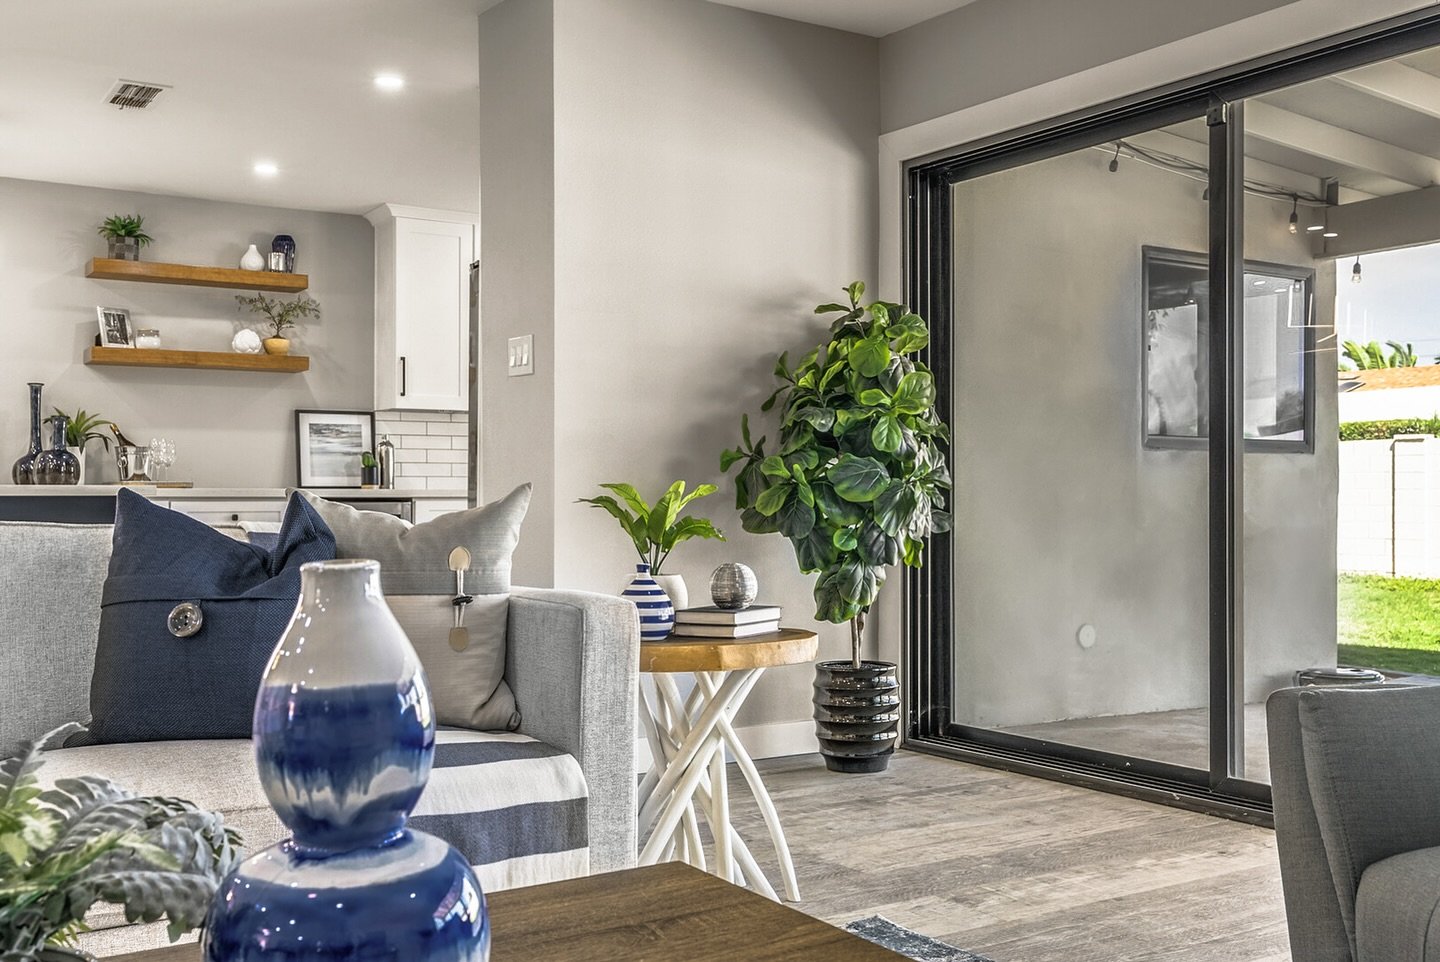 Those large patio doors let in so much natural light! We&rsquo;re definitely loving the extra hours of sunlight these days 🤩